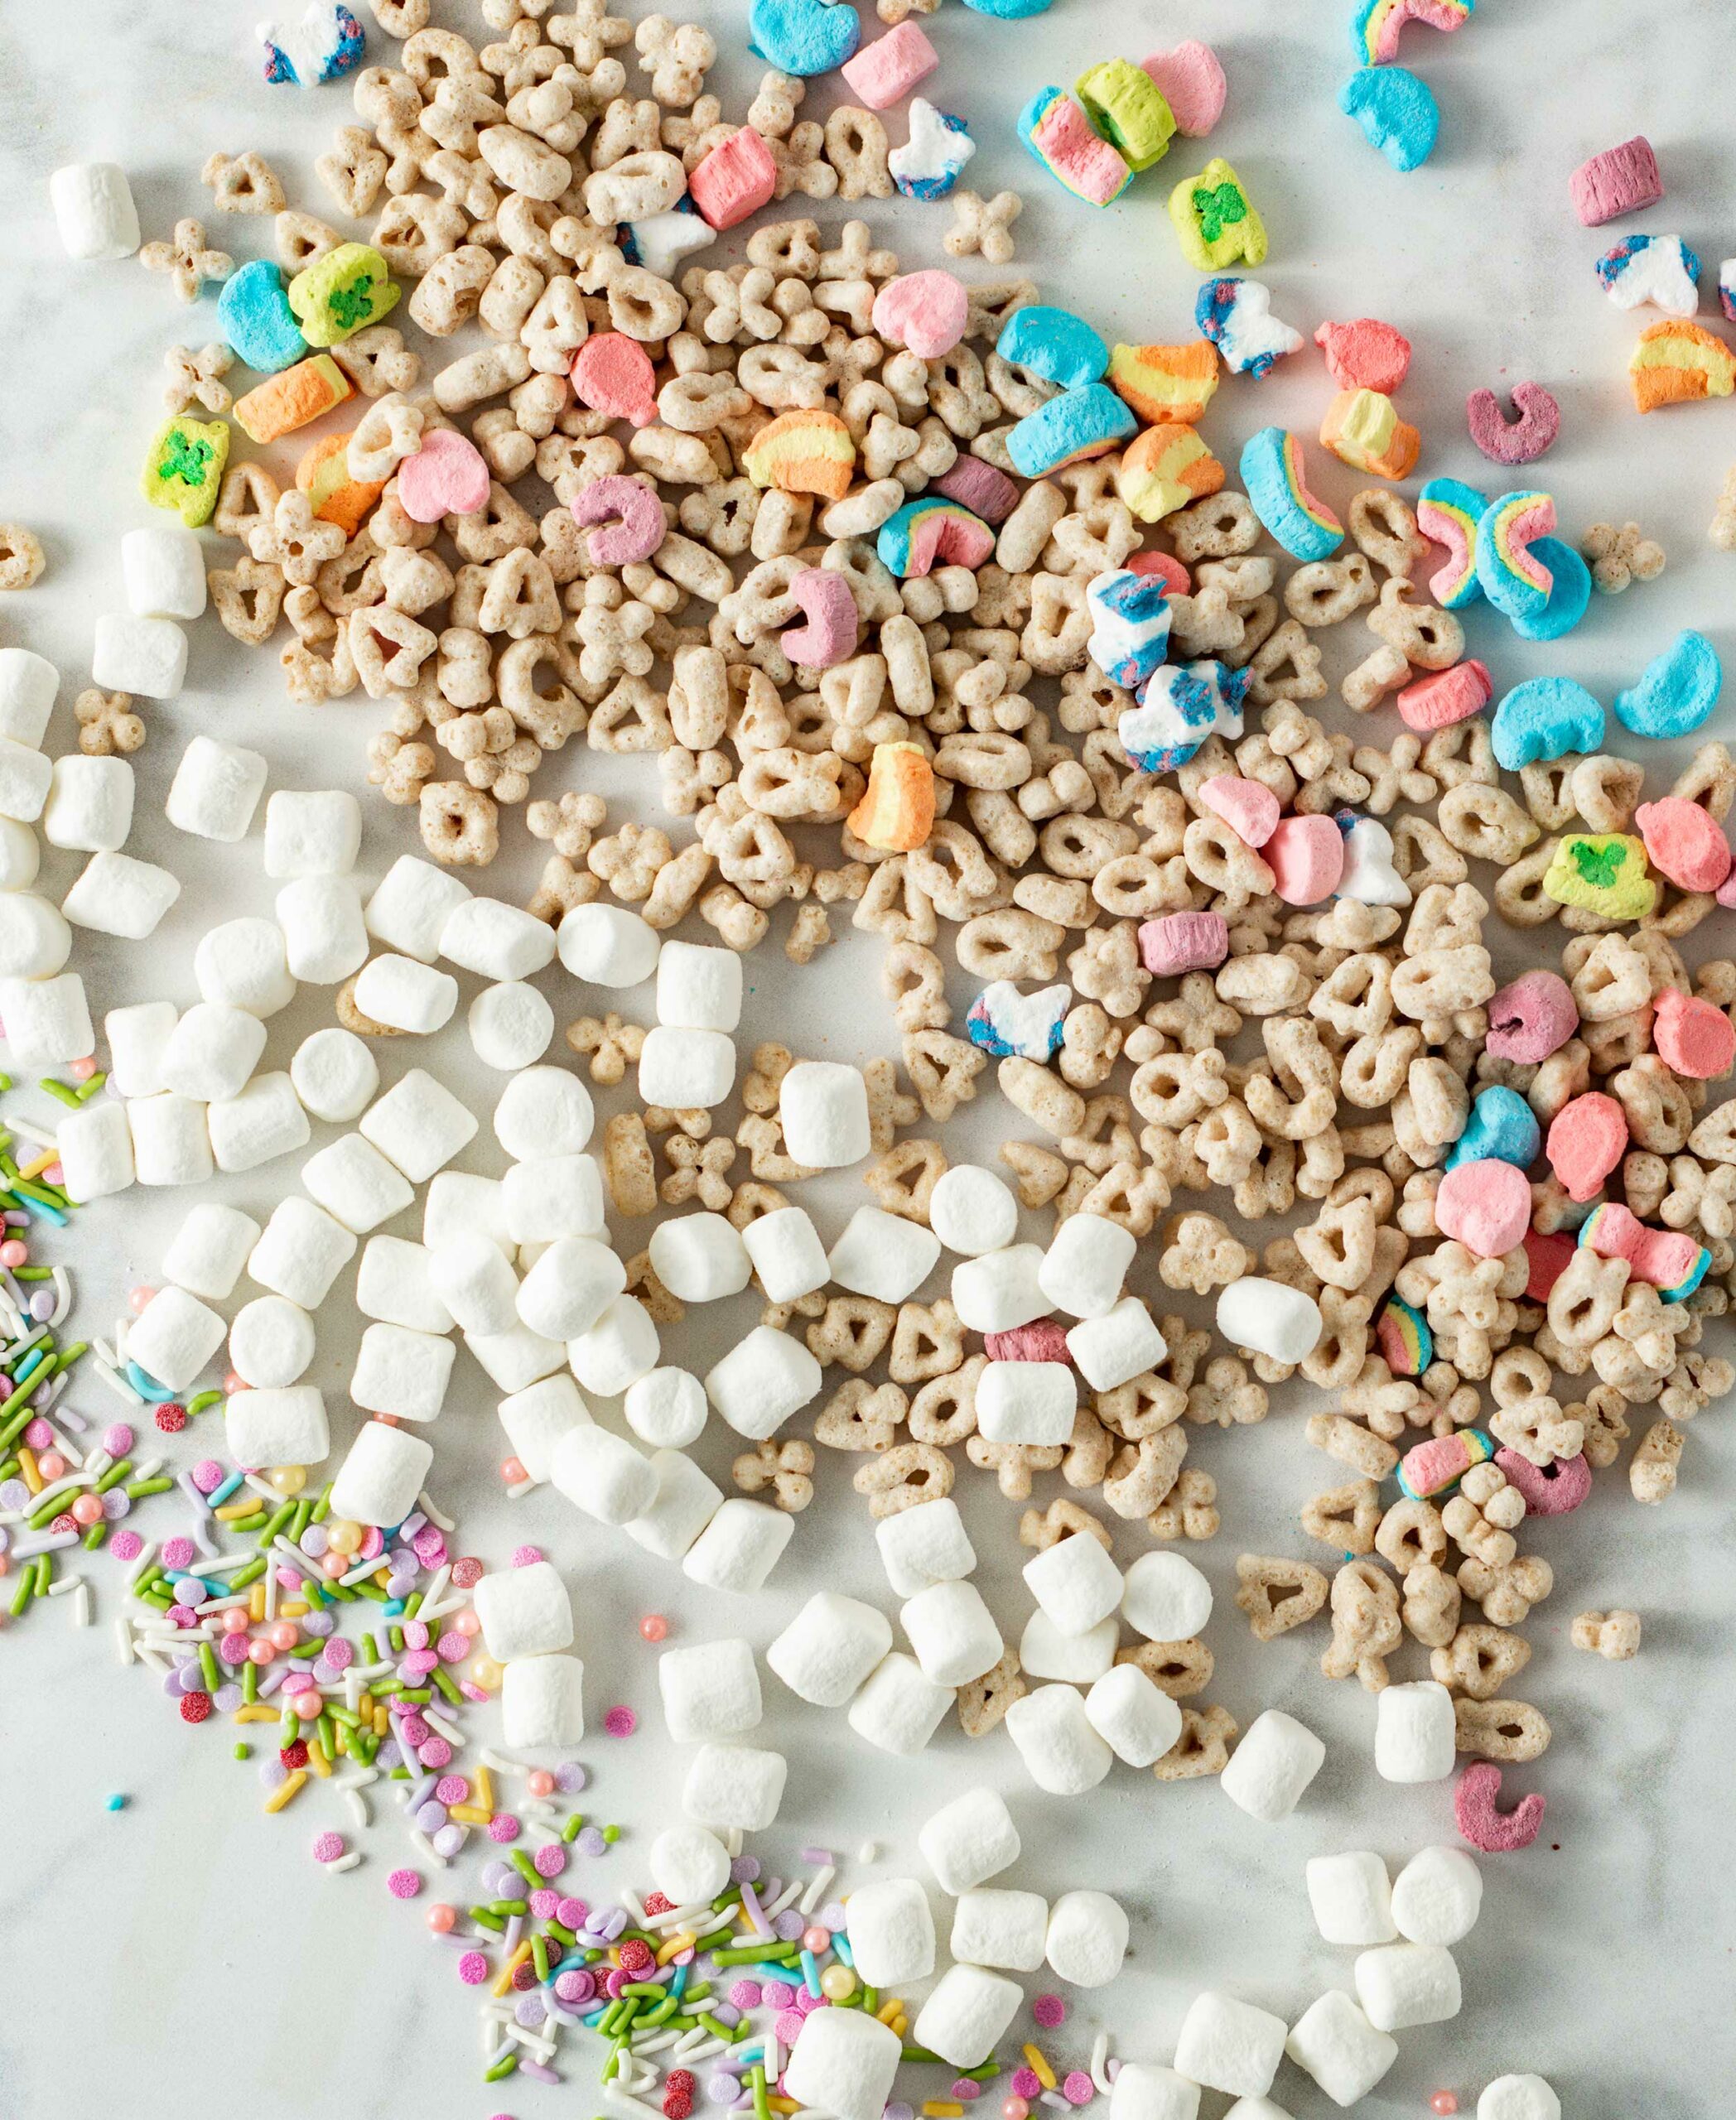 Ingredients for Lucky Charms Marshmallow Crispy Treats spread out on table